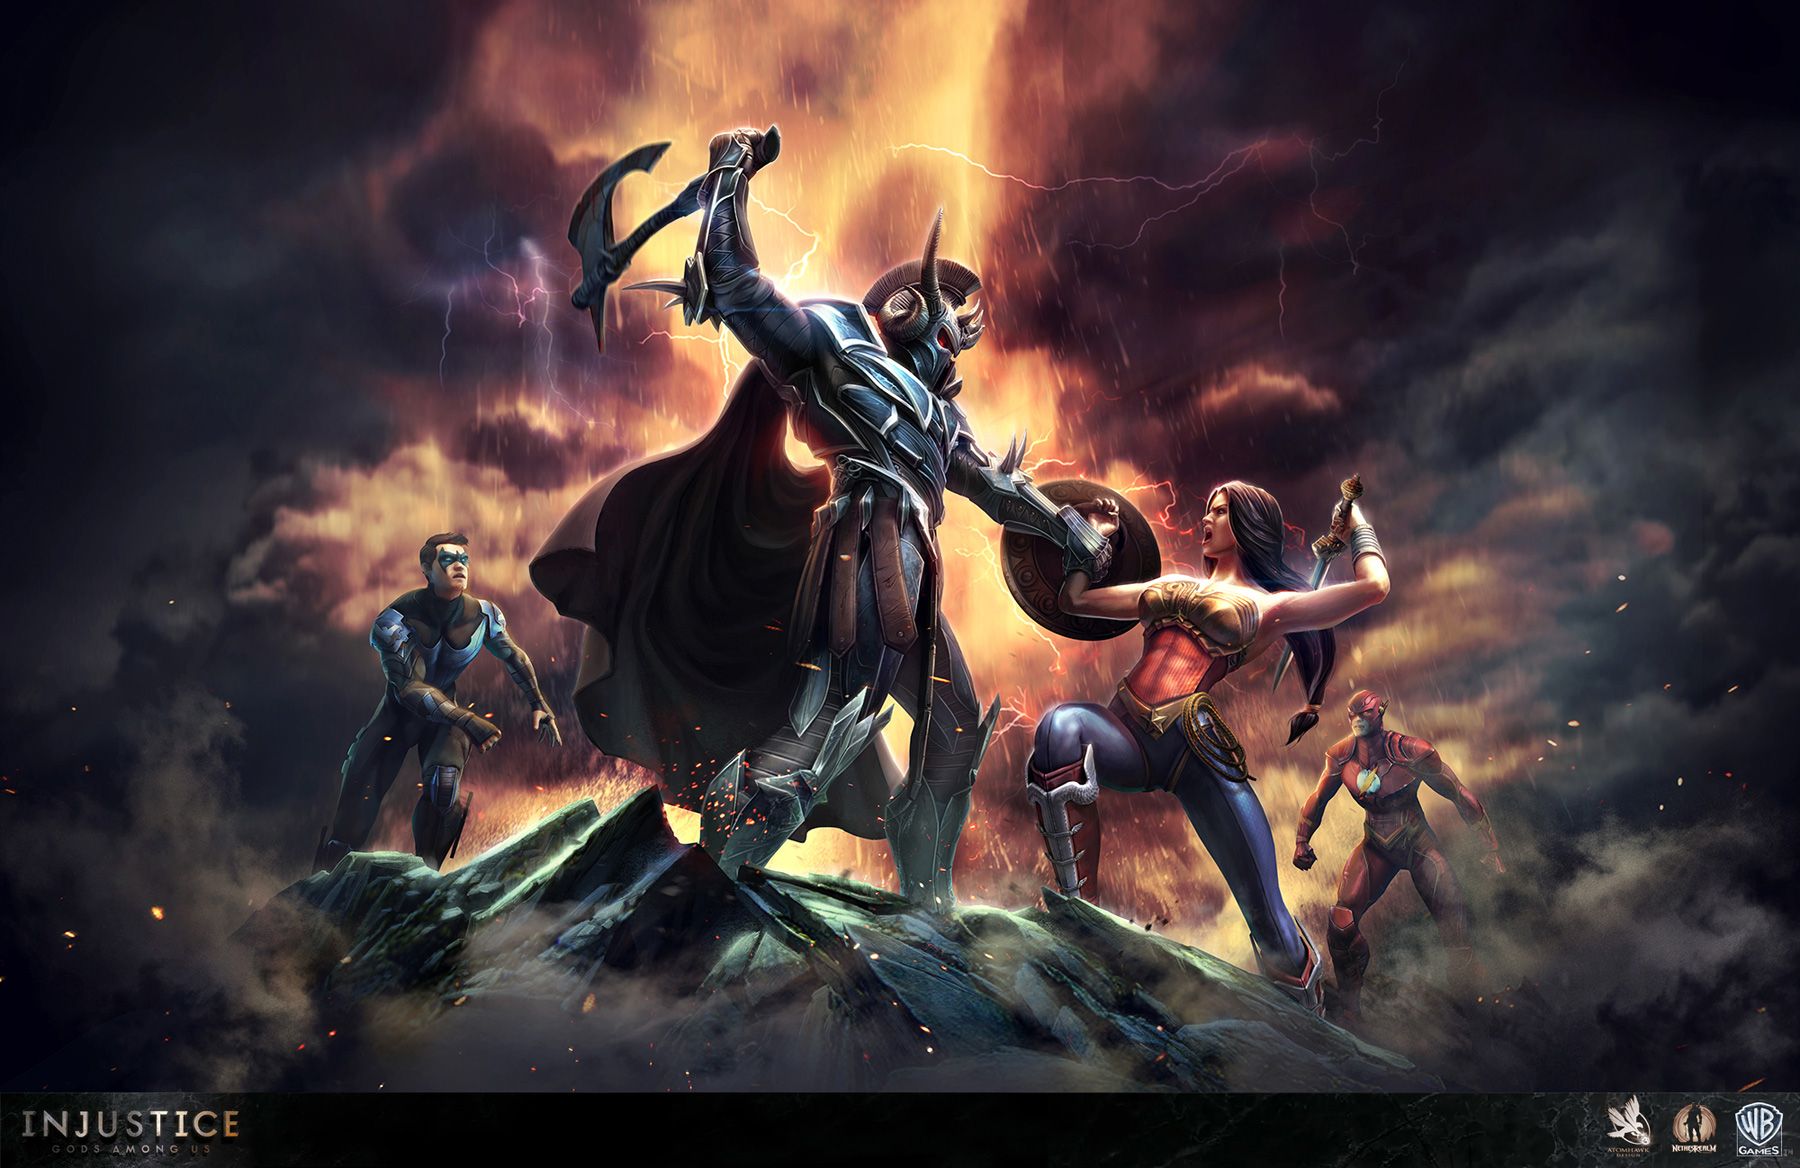 injustice: gods among us, video game, ares (dc comics), barry allen, dick grayson, flash, nightwing, wonder woman, injustice 8K